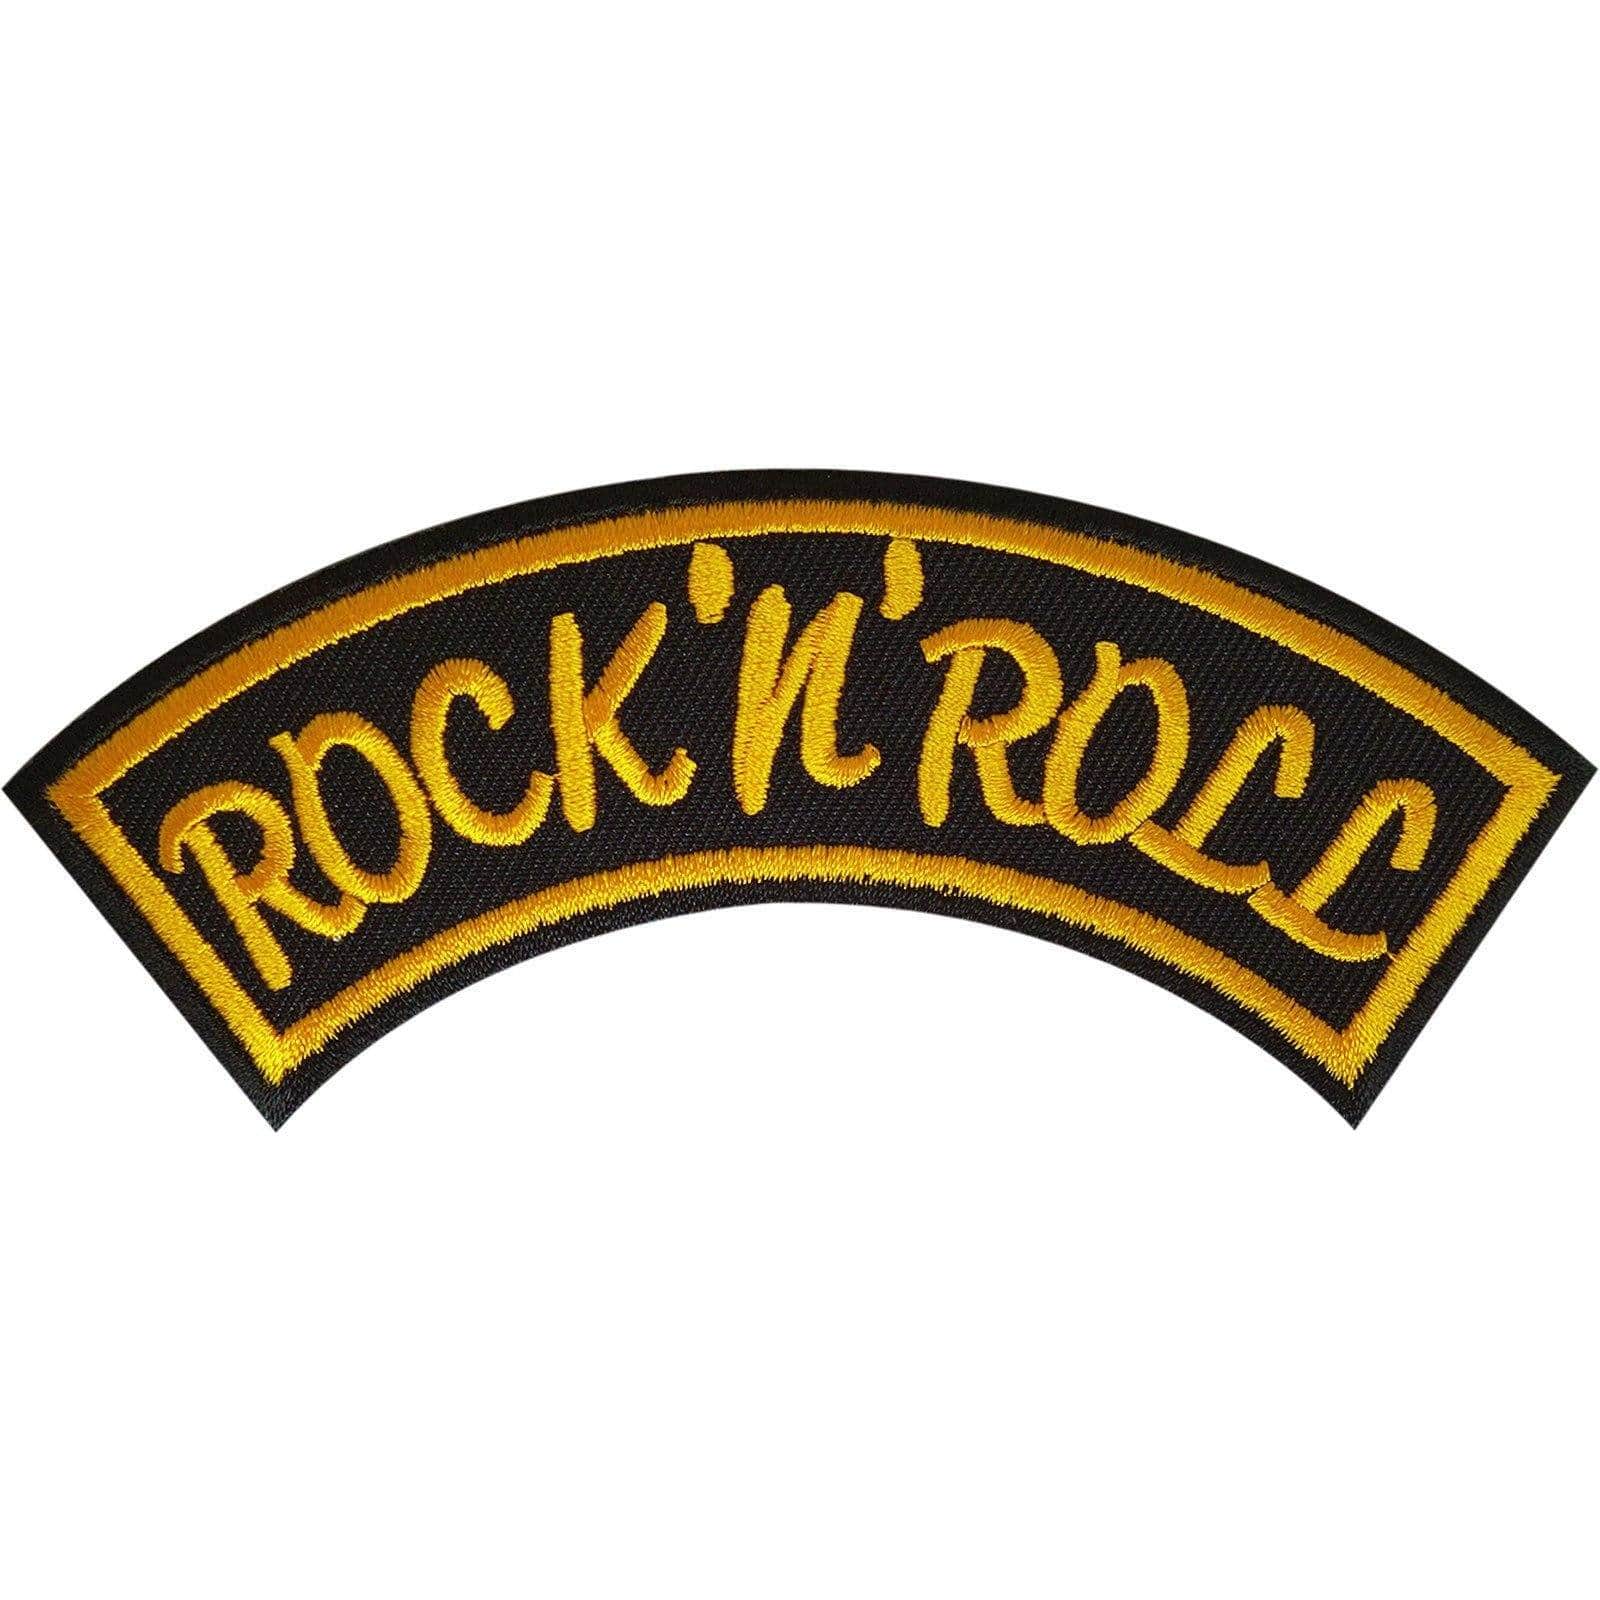 Rockabilly Rules Old School Patch Iron On Rock and Roll Music Embroidered  Badge